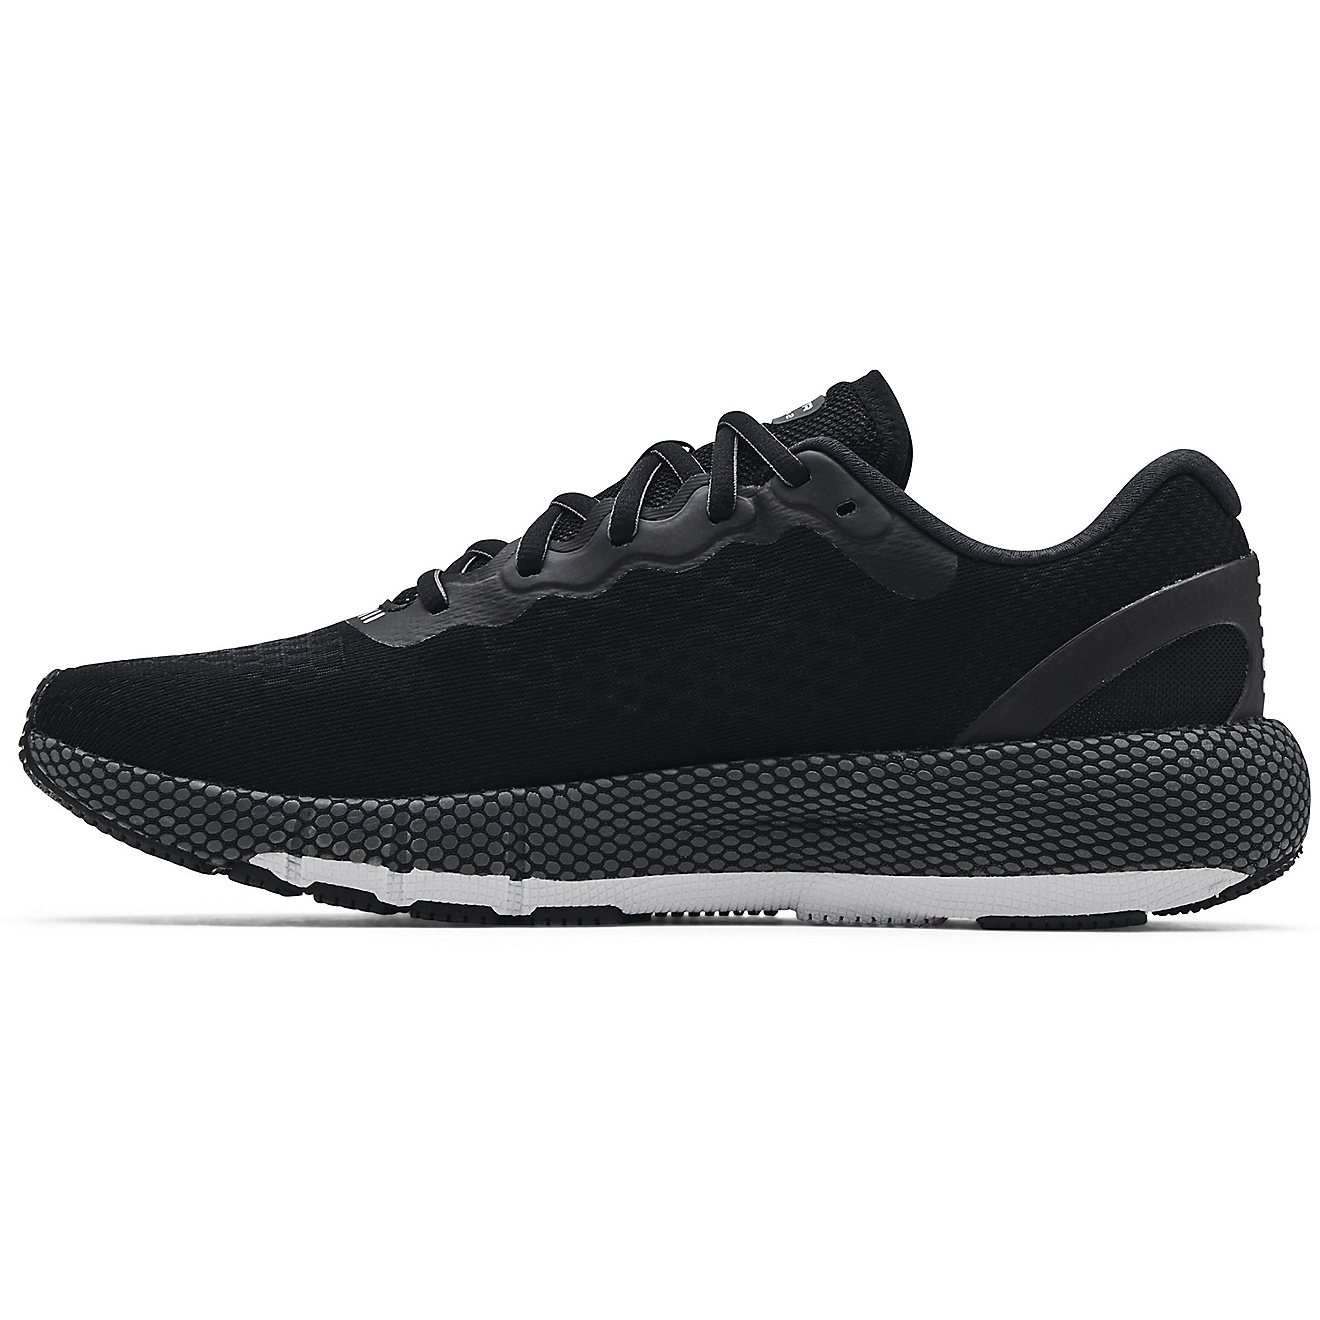 Under Armour Men's HOVR Machina 2 Running Shoes | Academy